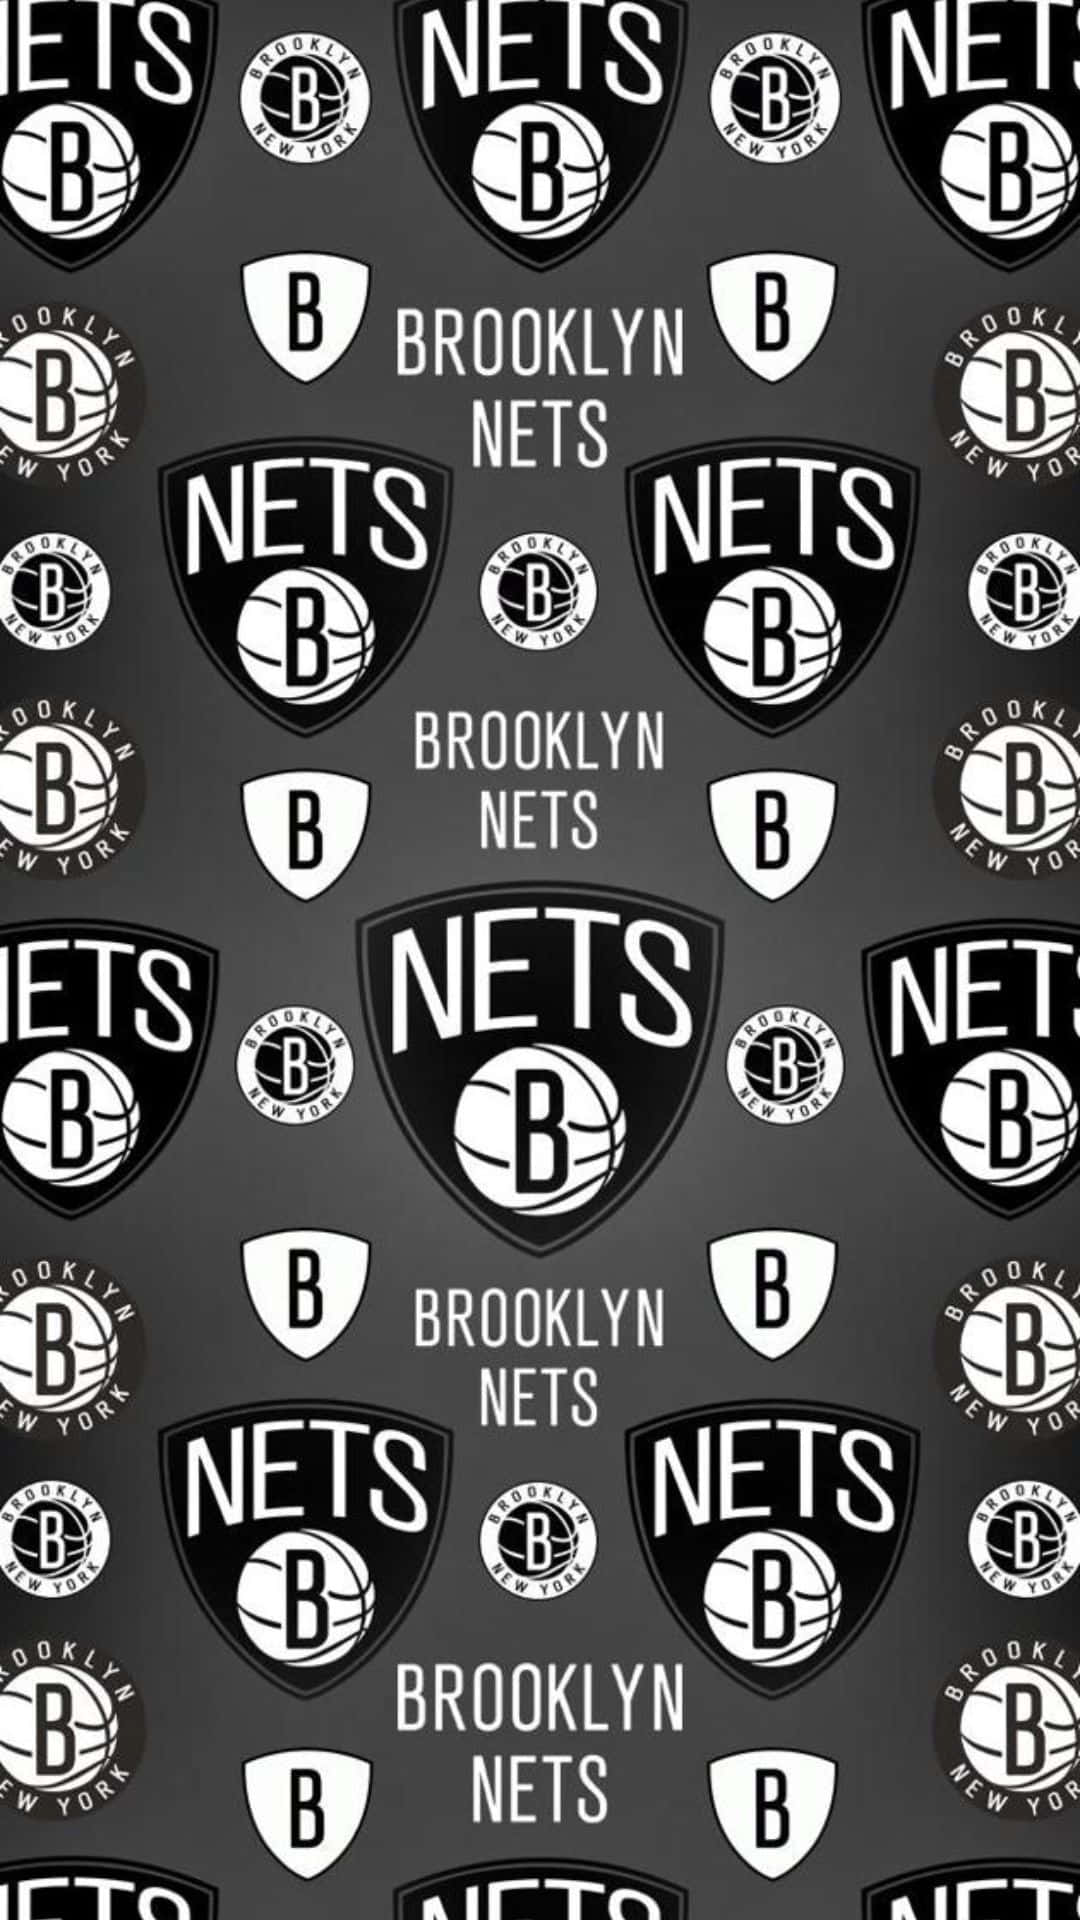 Catch the Brooklyn Nets in Action!